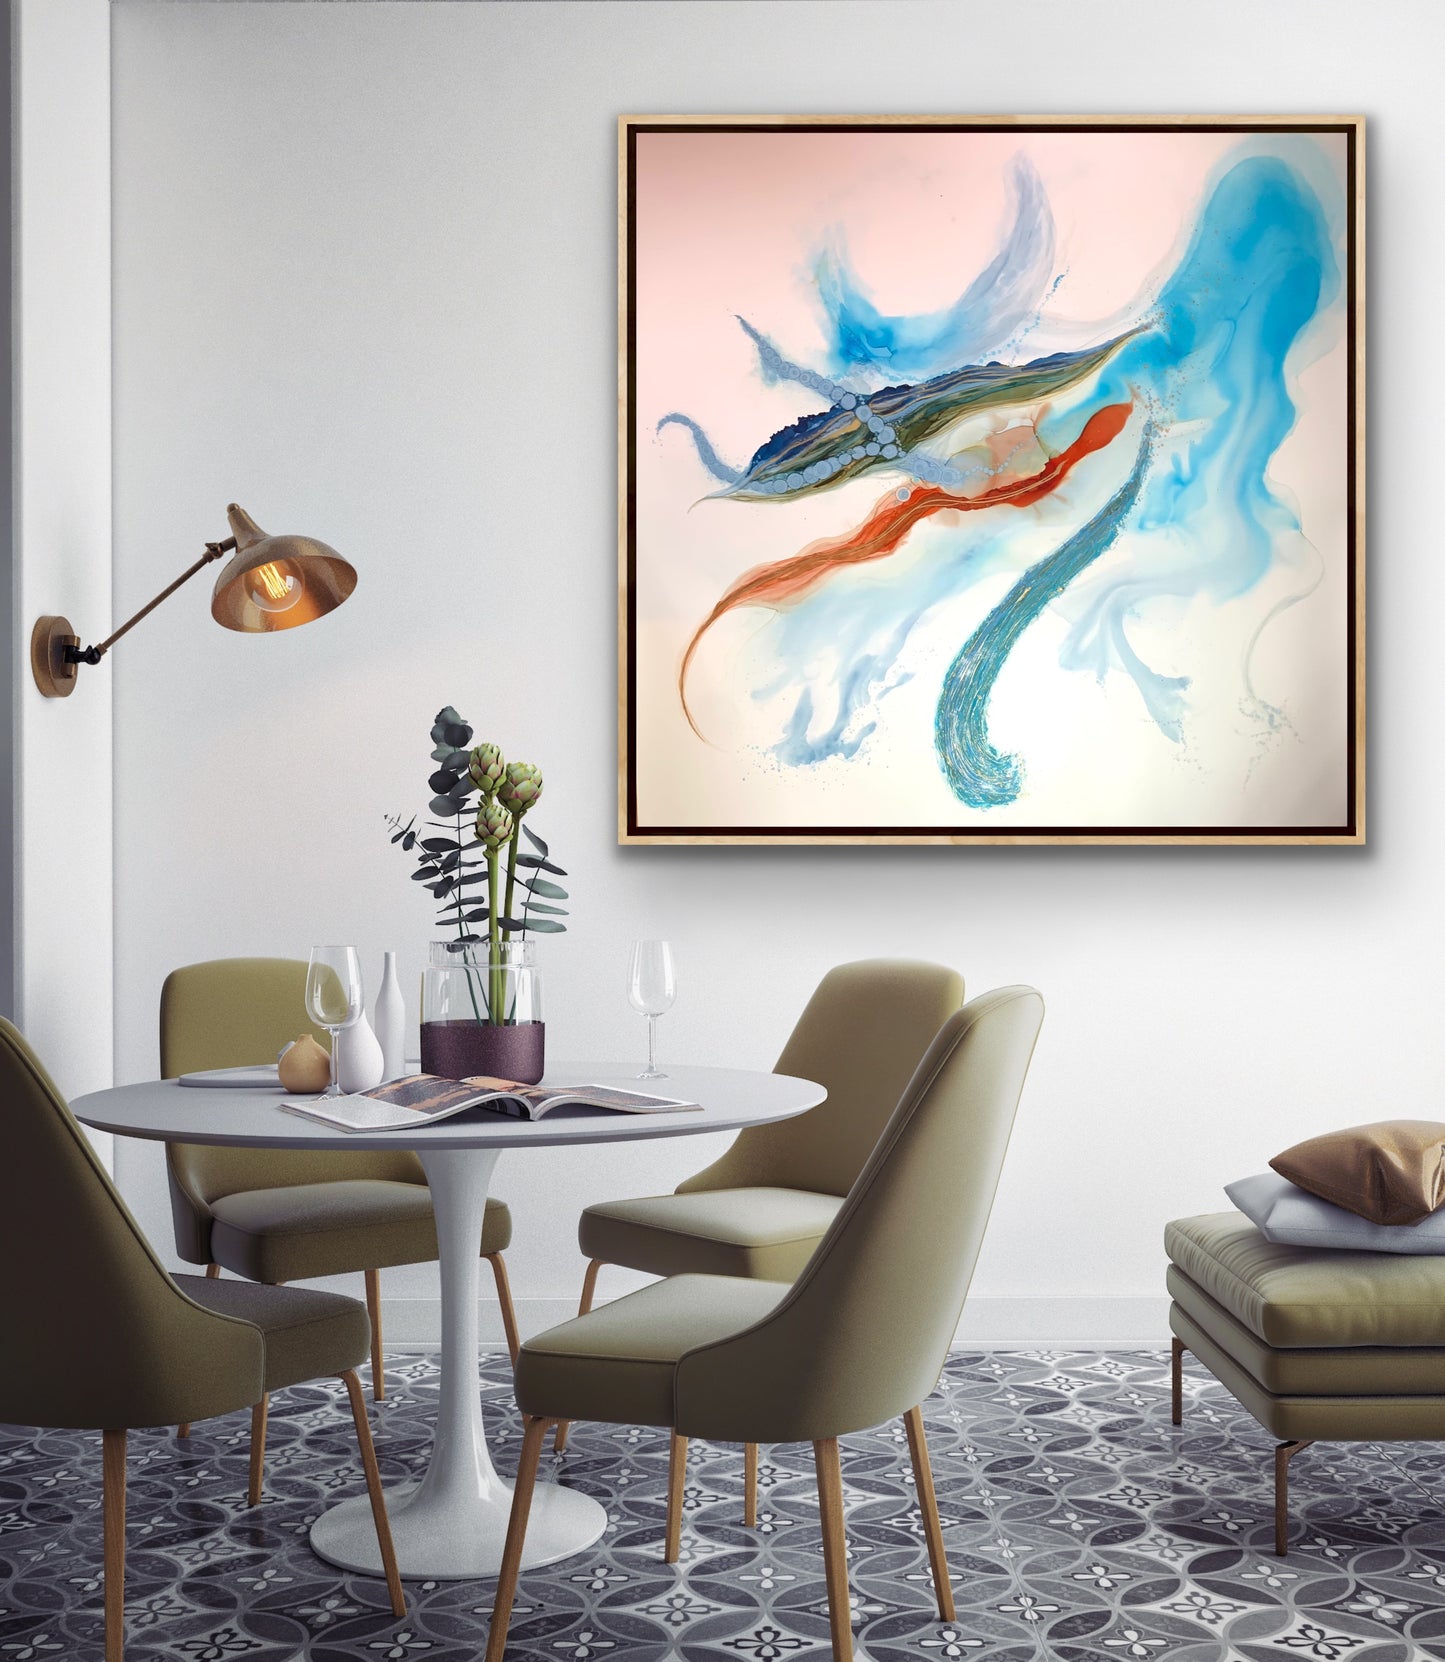 The Inlet - large abstract statement art.